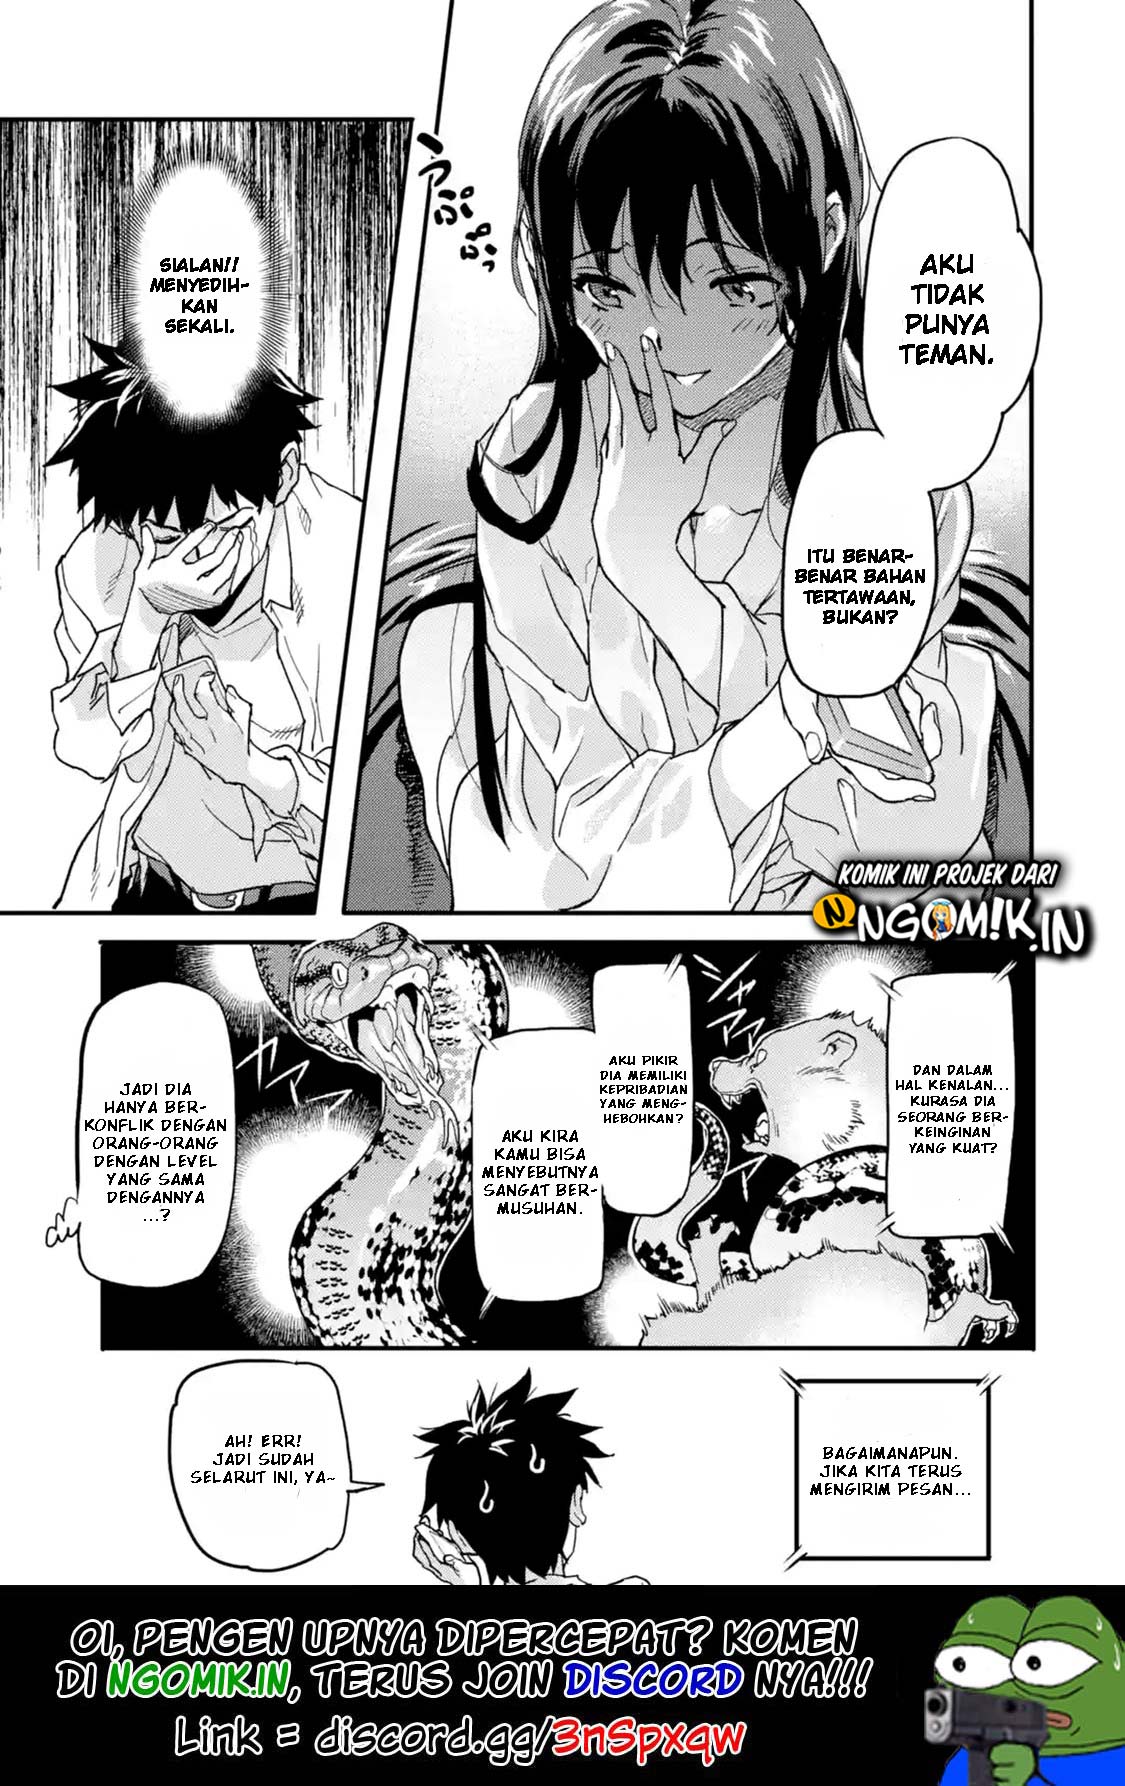 The Hero Who Returned Remains the Strongest in the Modern World Chapter 3-5